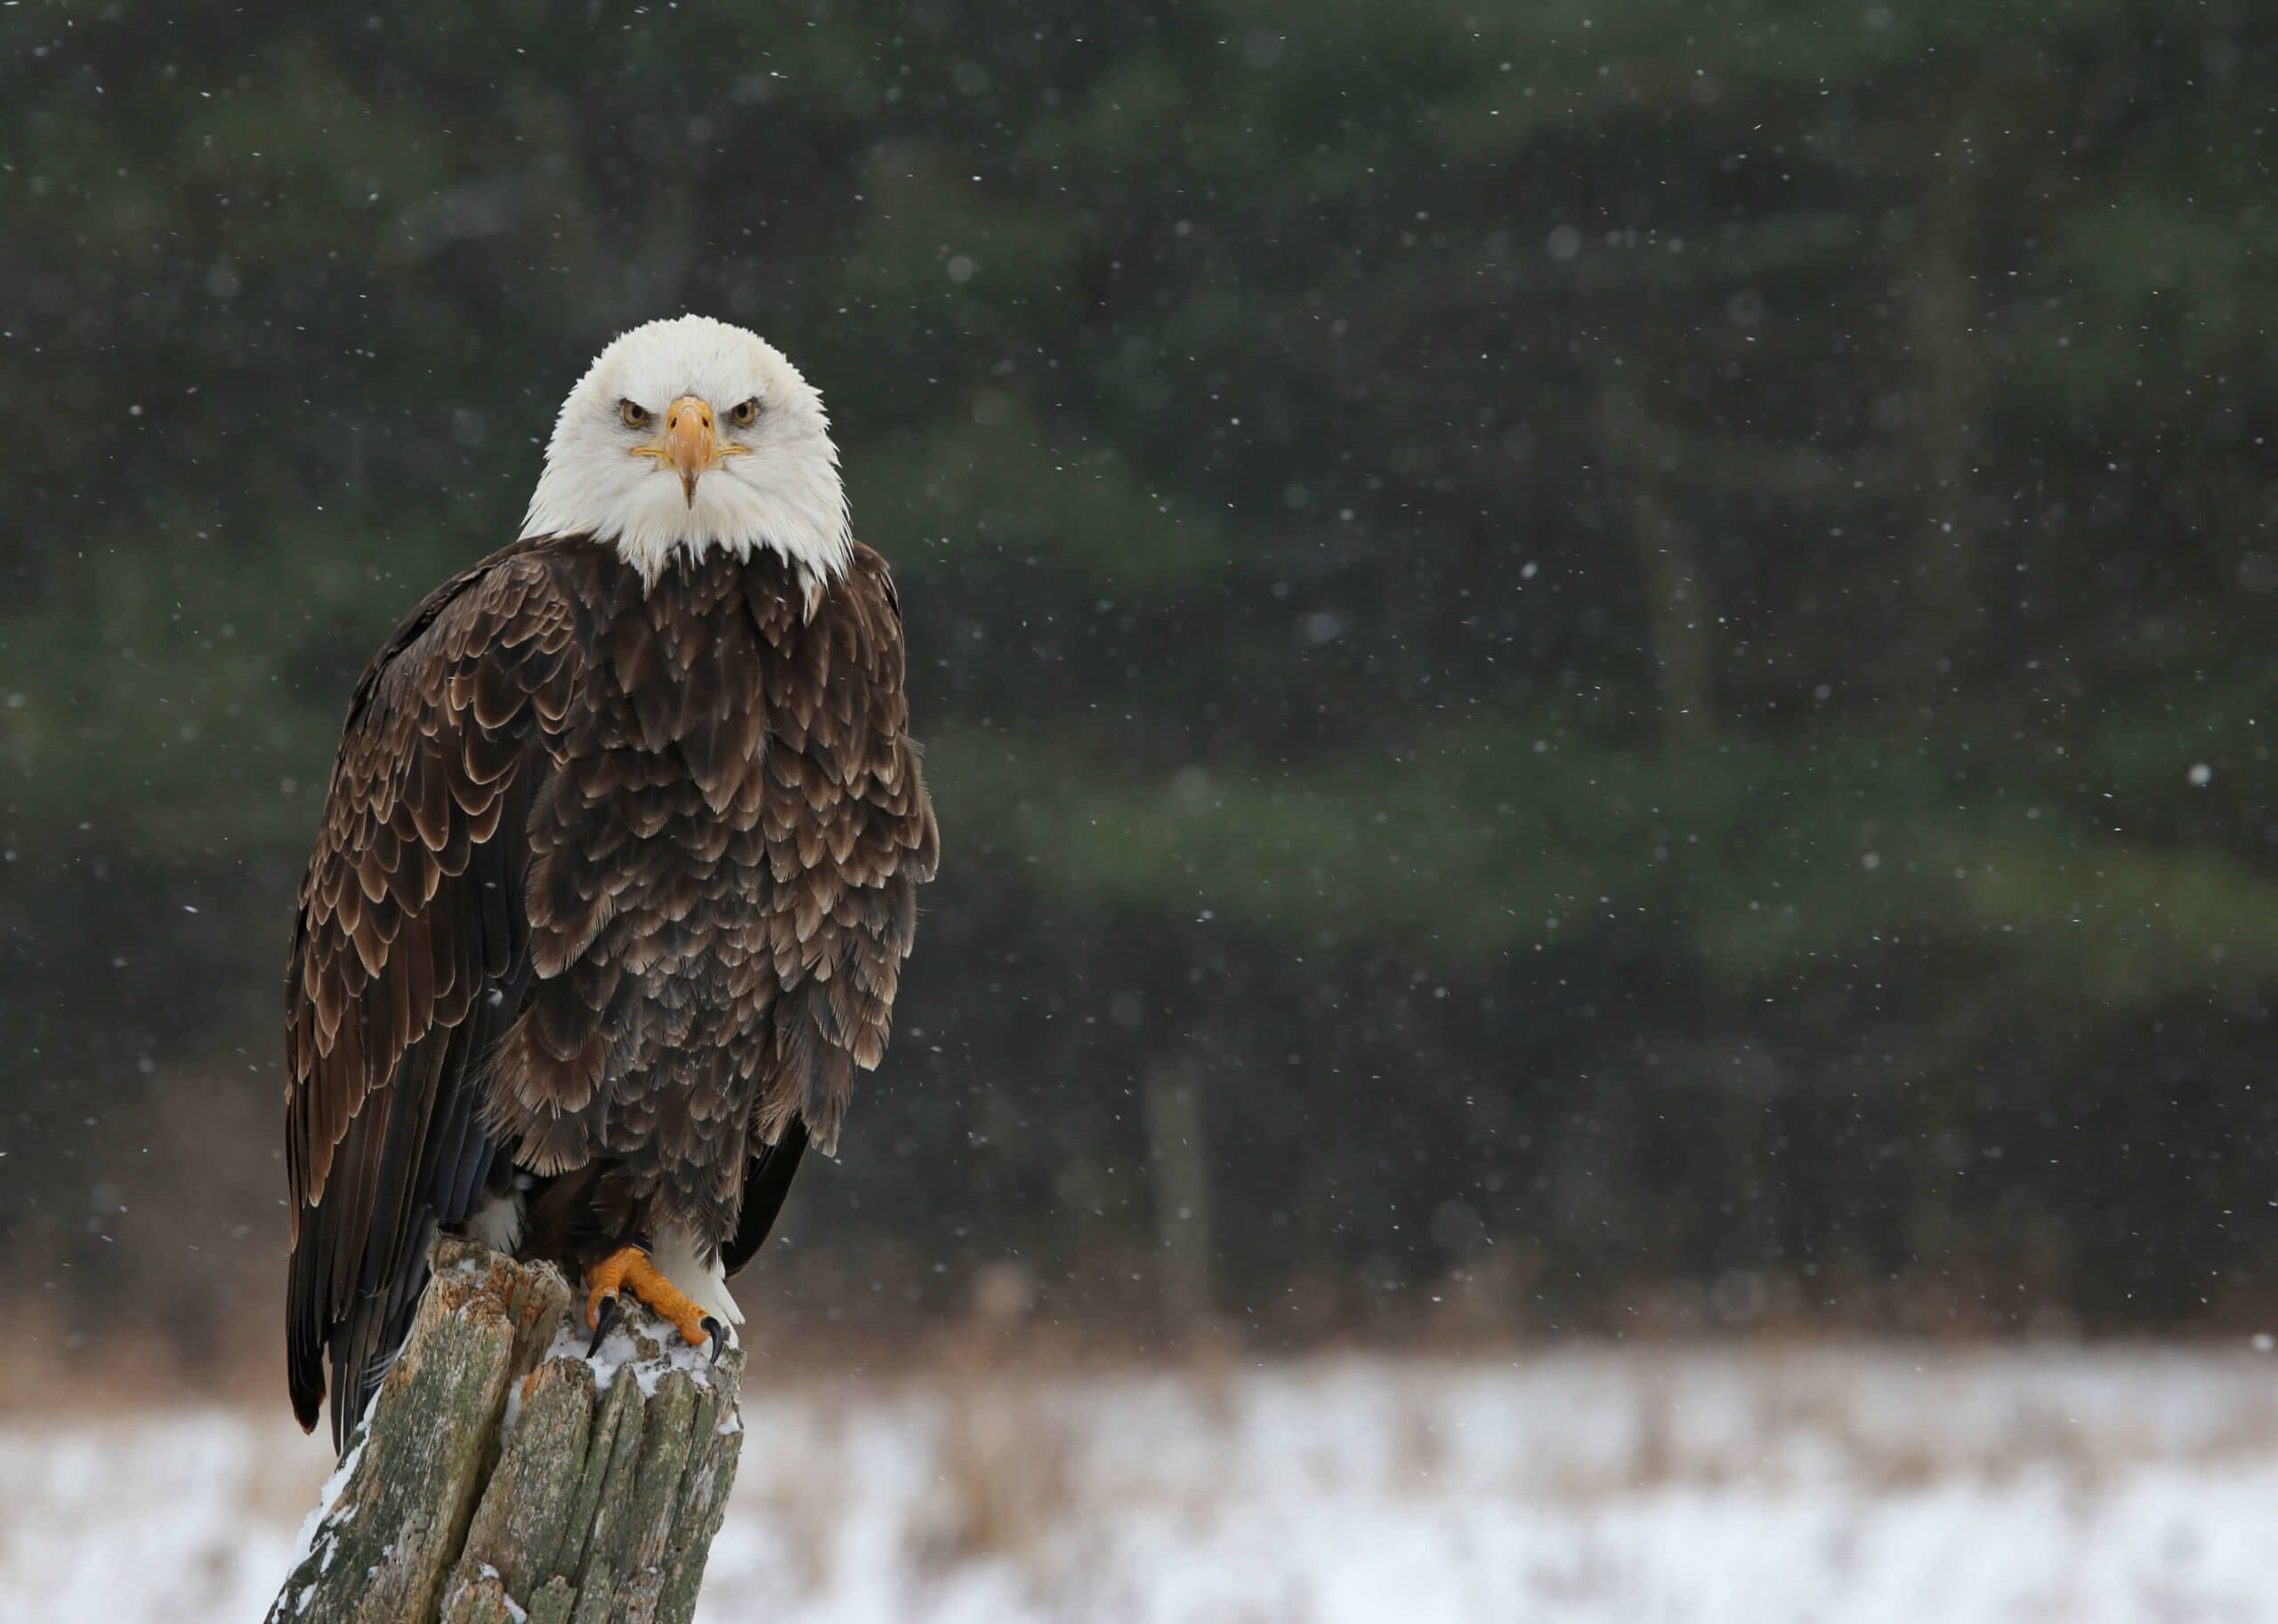 A stern looking Bald Eagle (haliaeetus leucocephalus) perched on a post looking directly at the camera, with snow falling in the background.